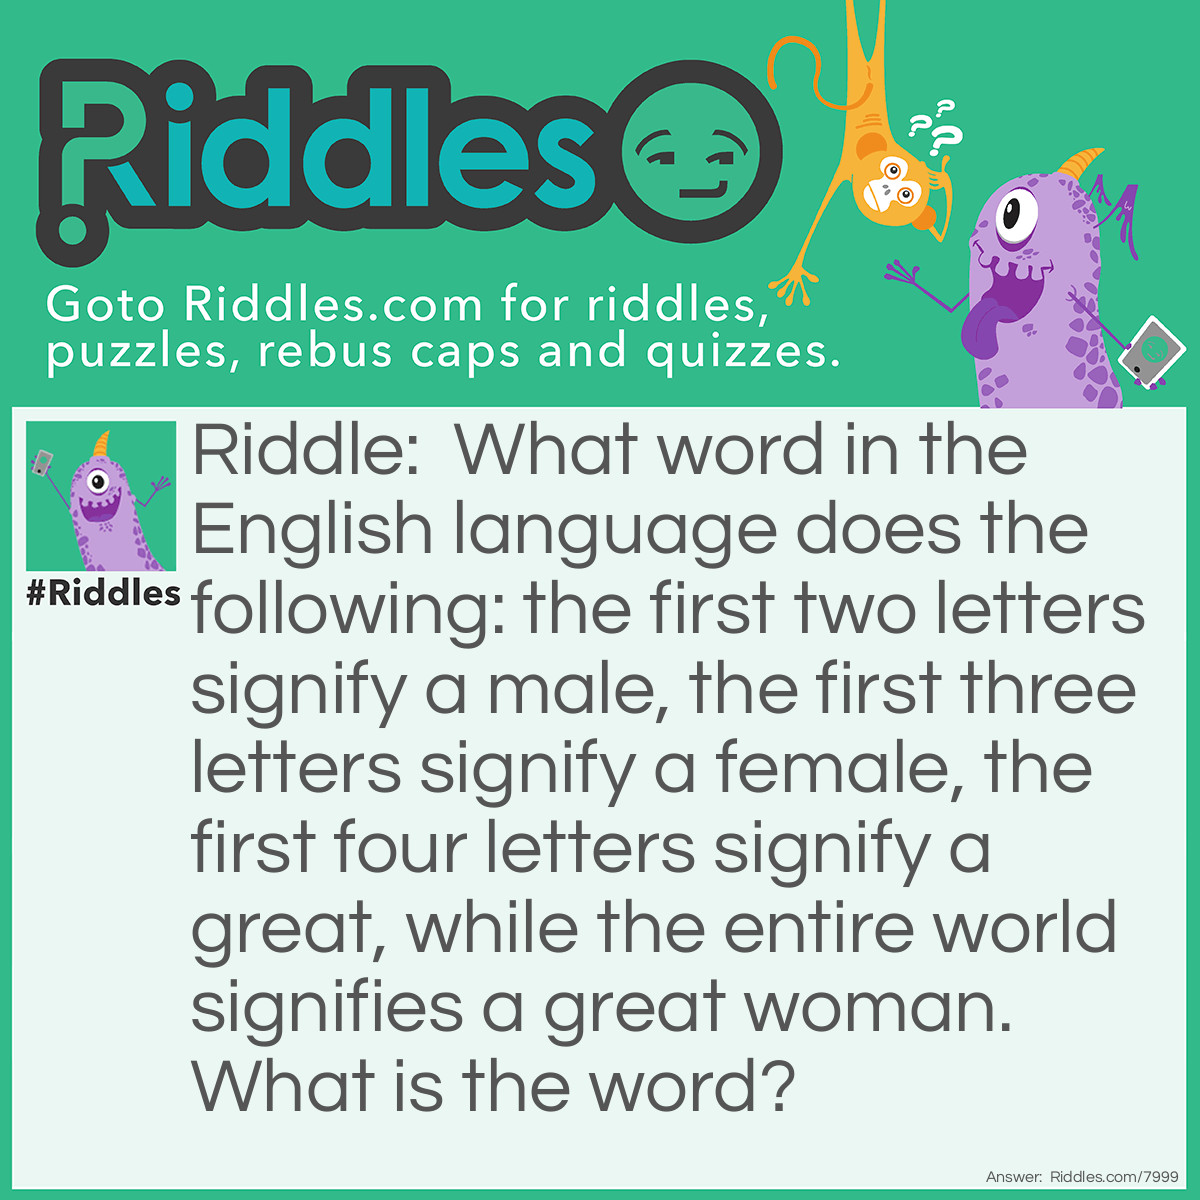 Riddle: What word in the English language does the following: the first two letters signify a male, the first three letters signify a female, the first four letters signify a great, while the entire world signifies a great woman. What is the word? Answer: Heroine. He-Her-Hero-Heroine